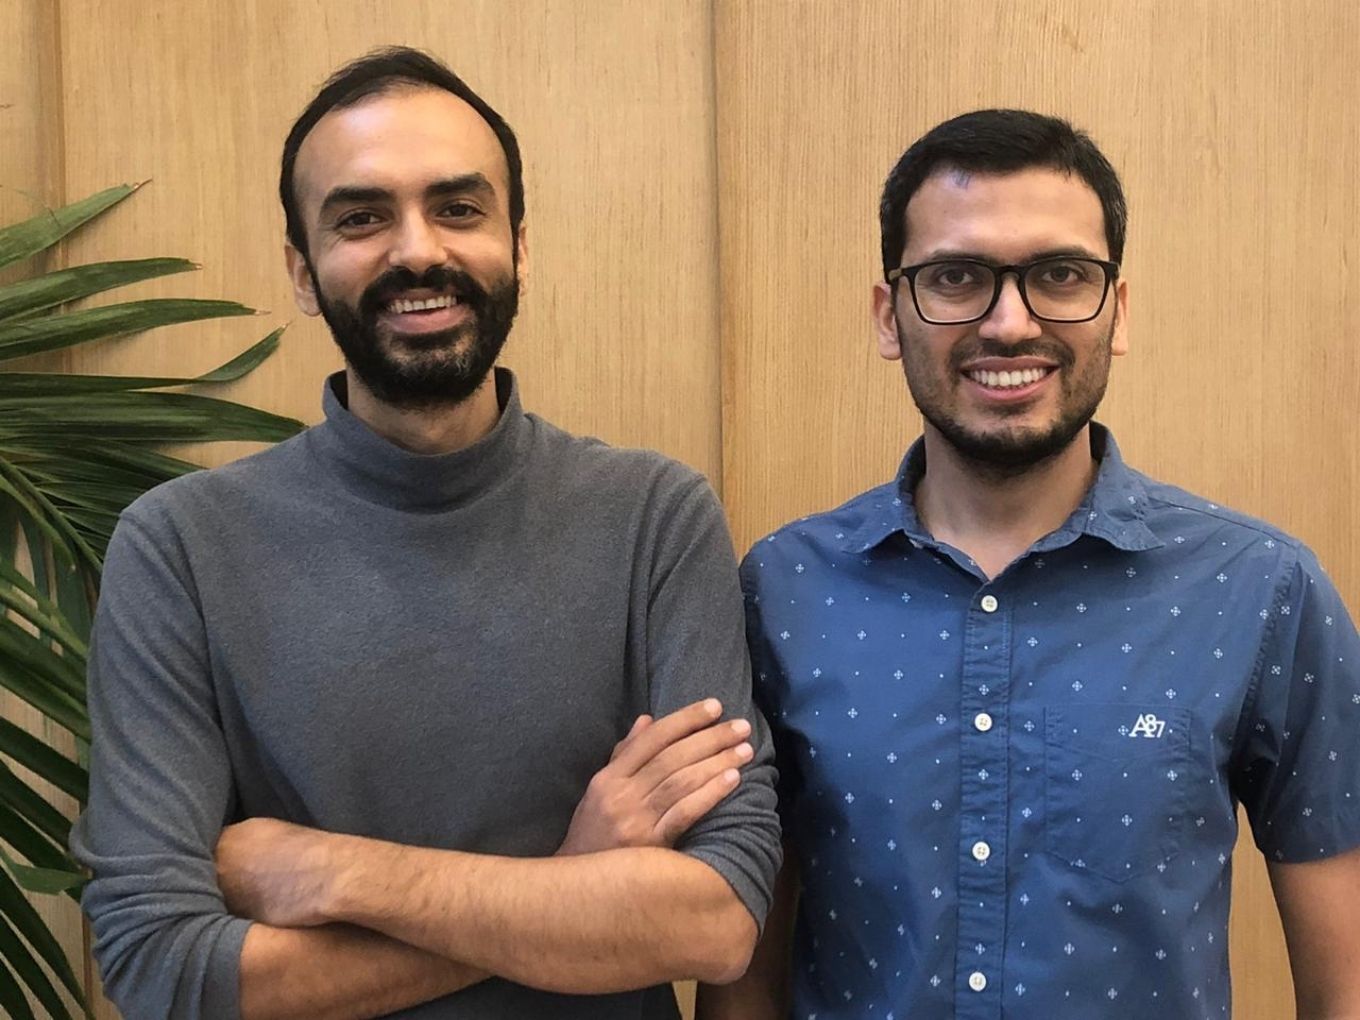 PlumHQ Bags $15 Mn From Tiger Global To Build Employee Insurance Product For SMEs